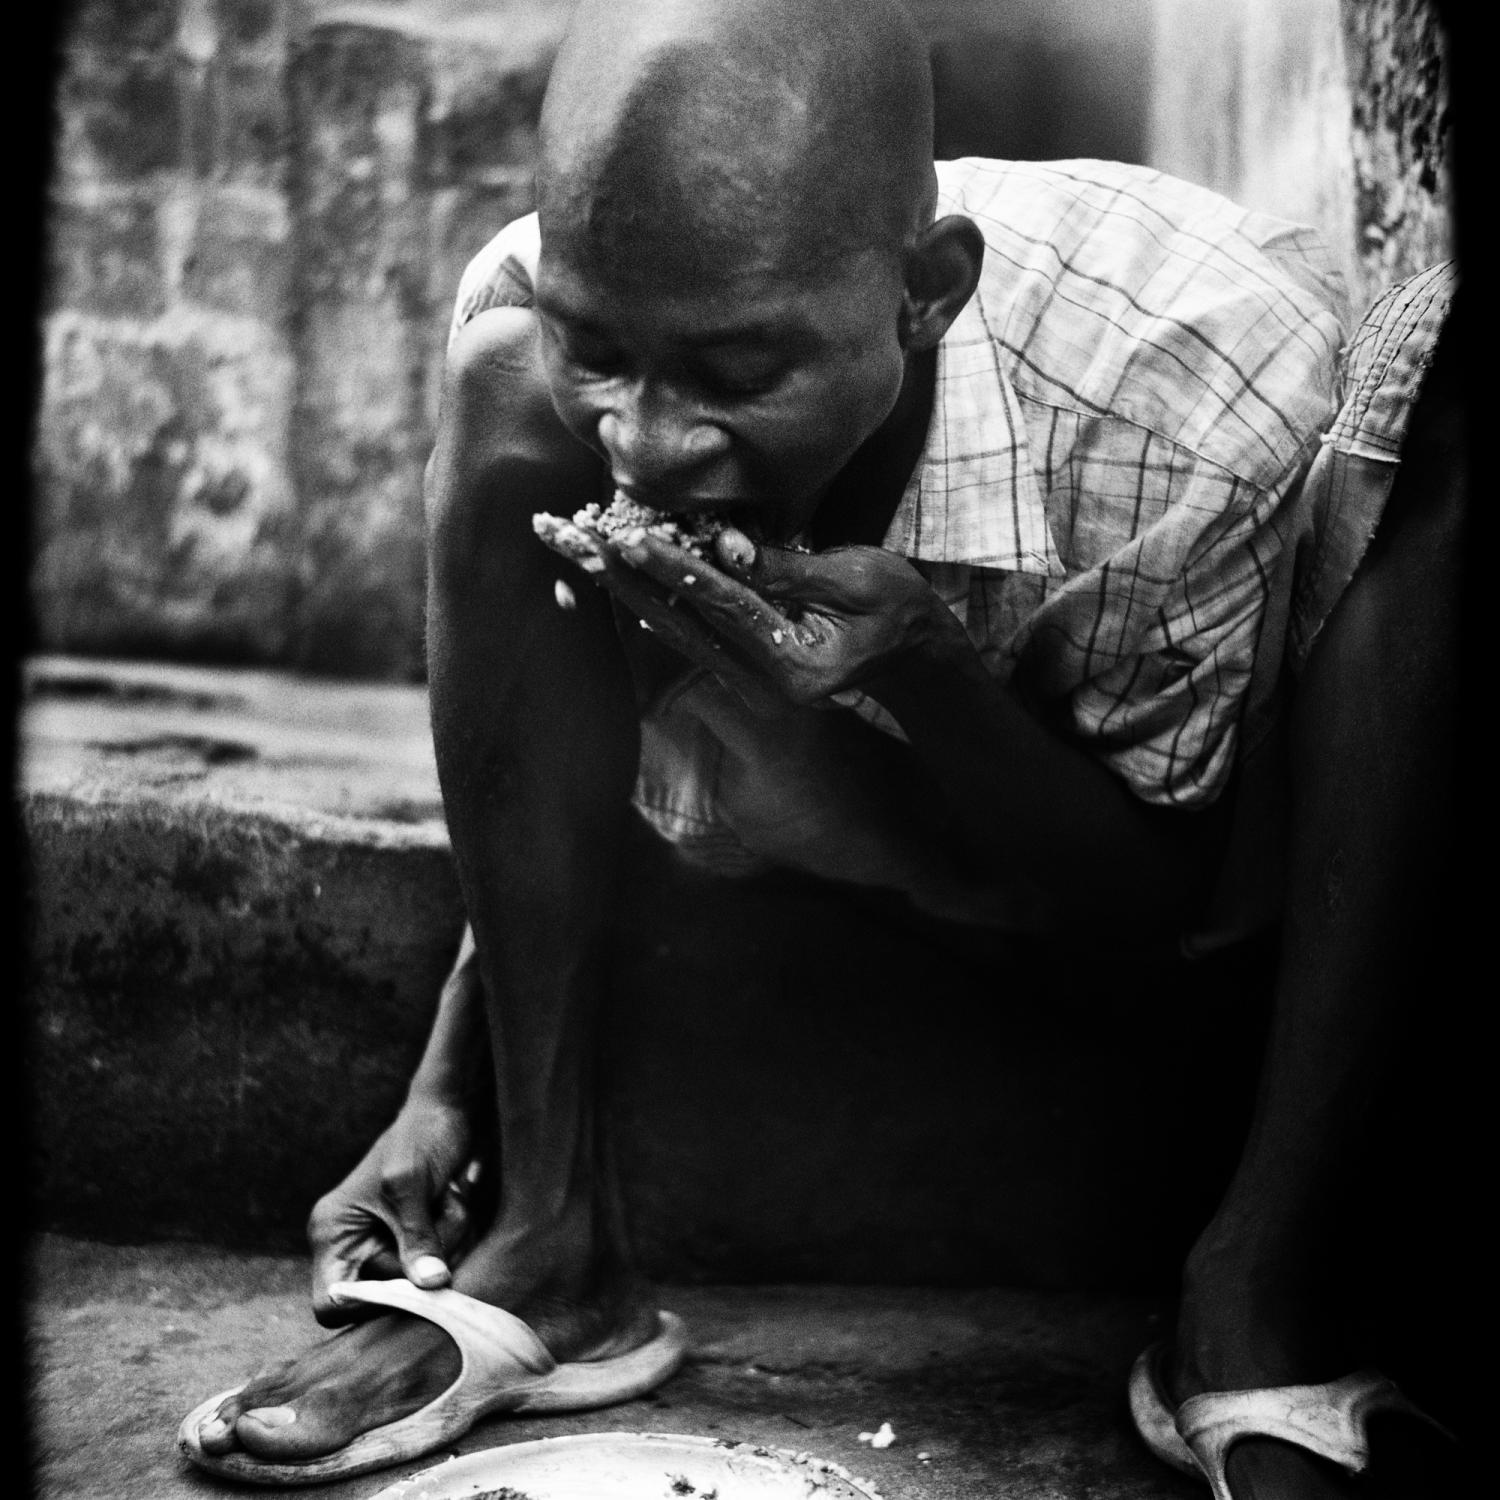 City of rest - SIERRA LEONE Freetown.
August 2007.
An inmate eating at...